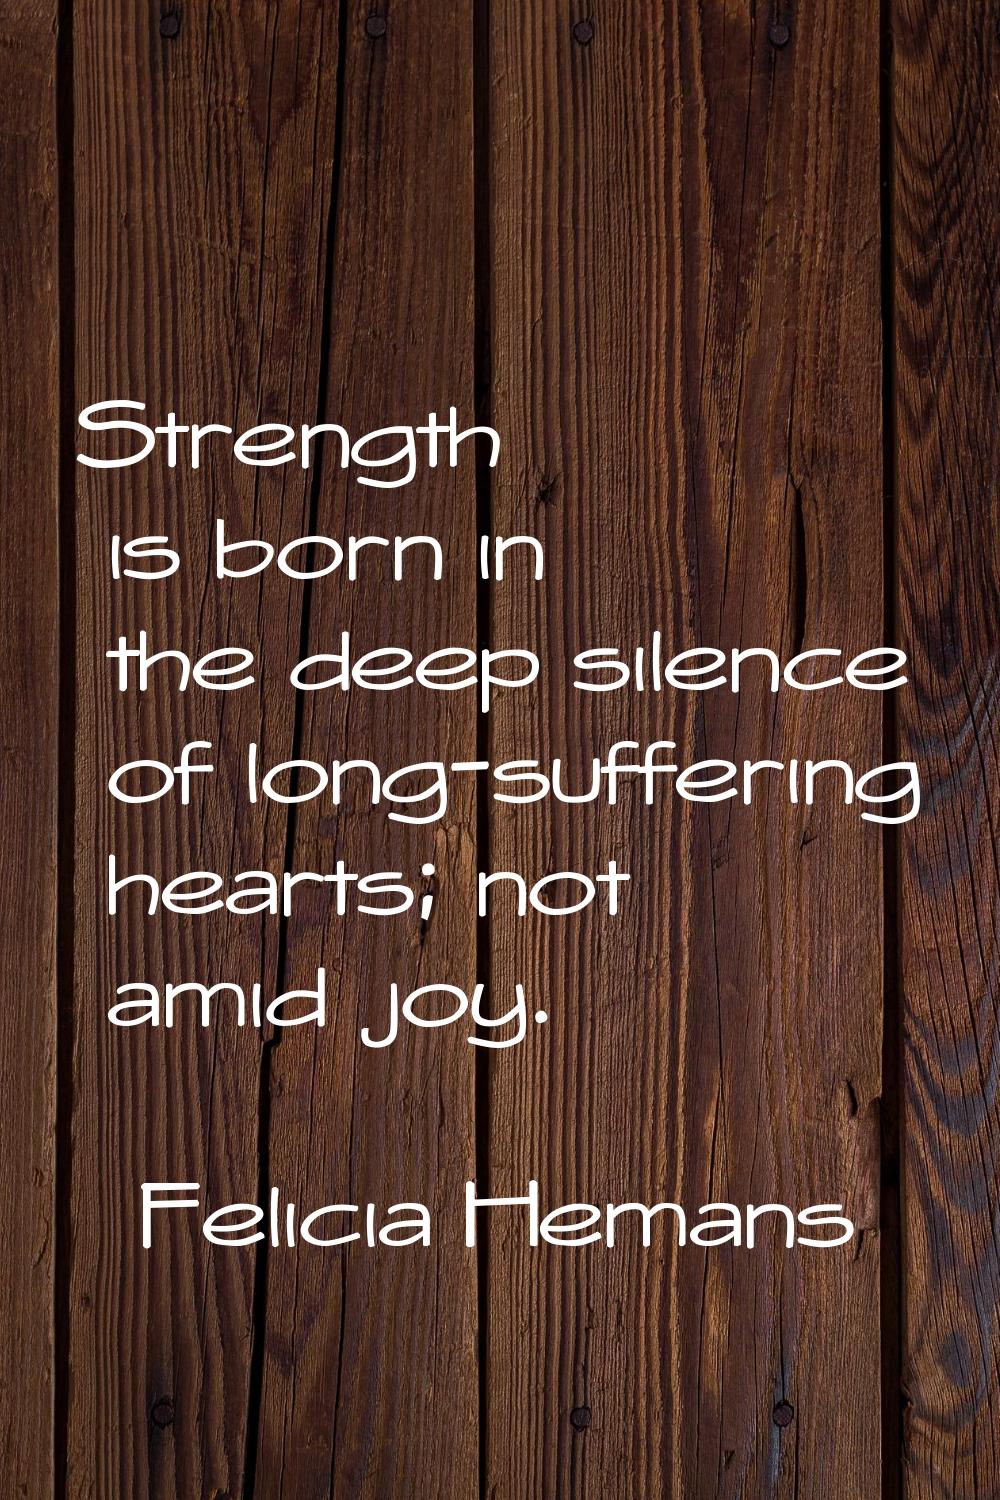 Strength is born in the deep silence of long-suffering hearts; not amid joy.